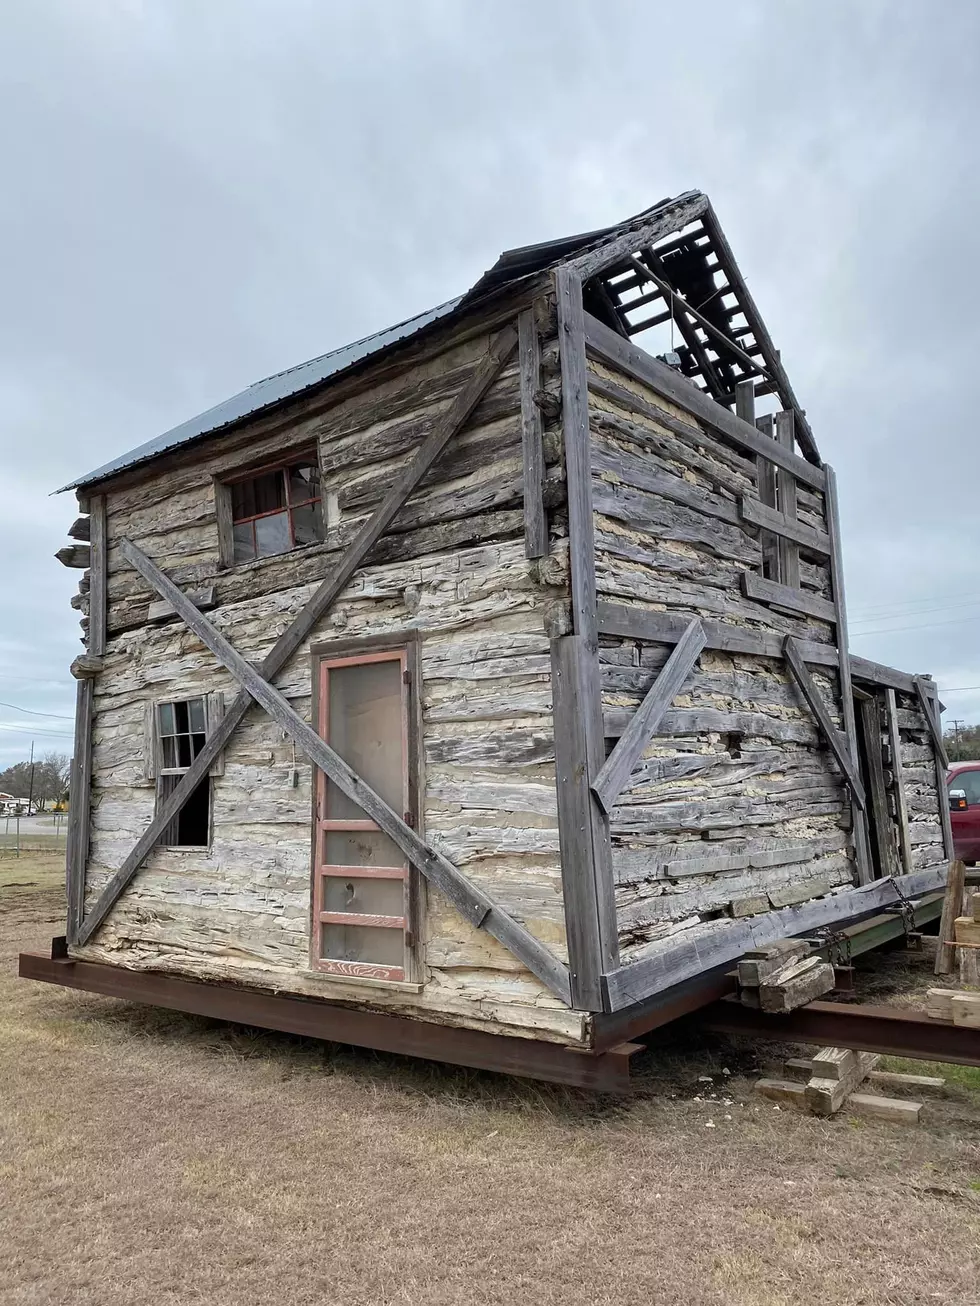 Check Out This Fully Restored Texas Historical Cabin